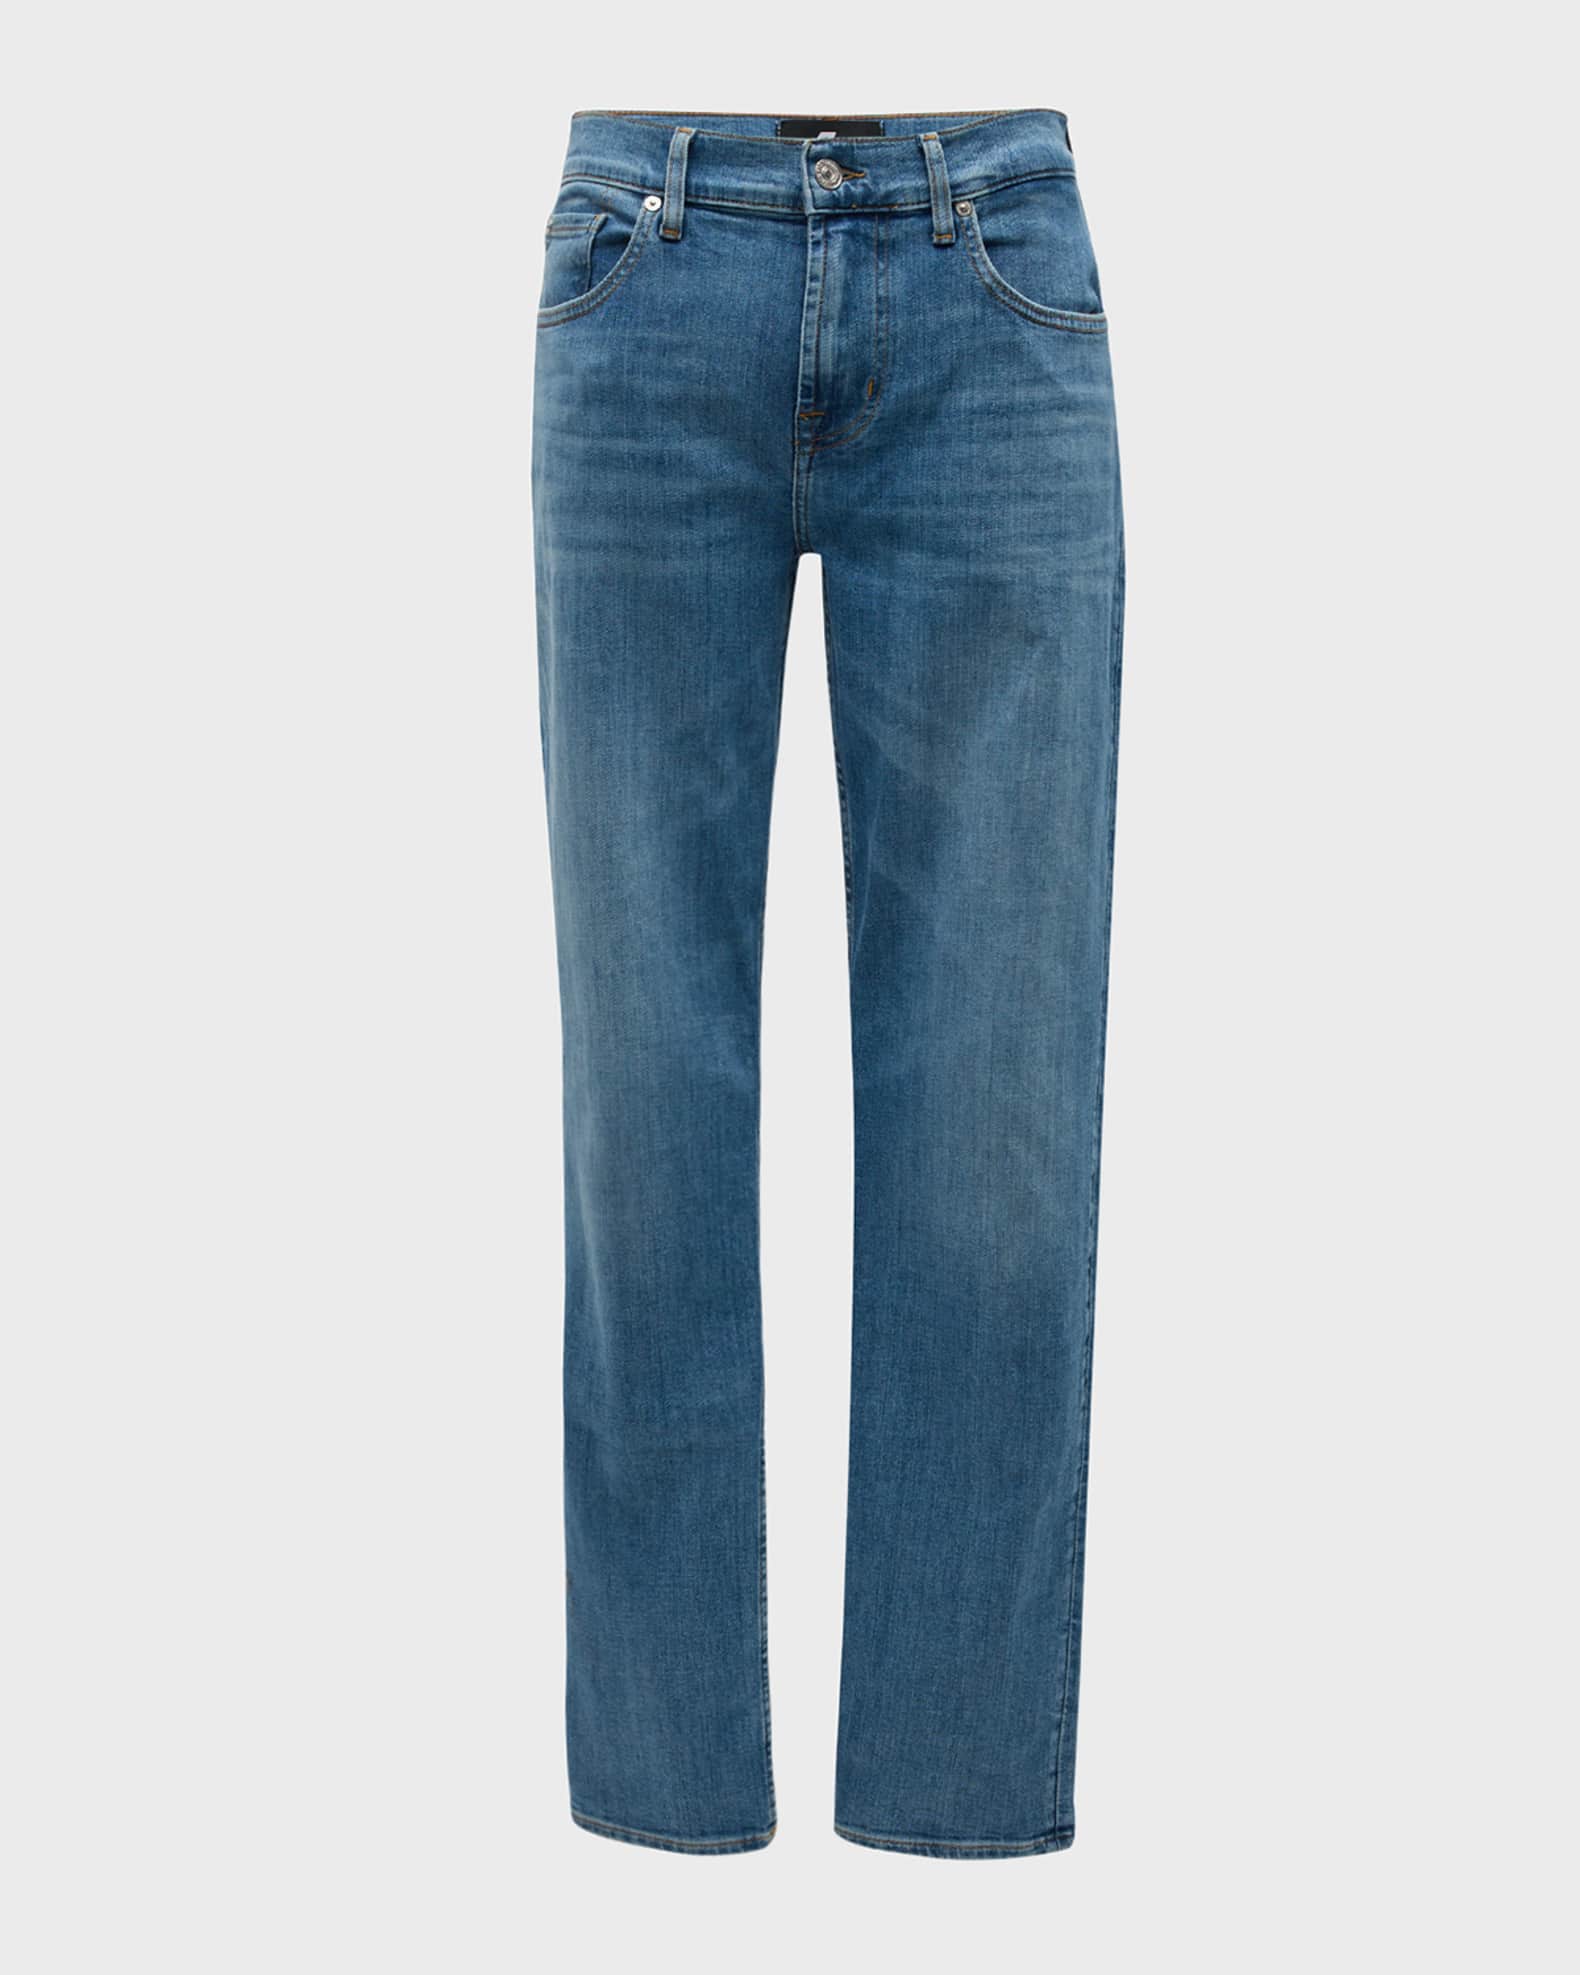 7 for all mankind Men's Slimmy EarthKind Stretch Tek Jeans | Neiman Marcus